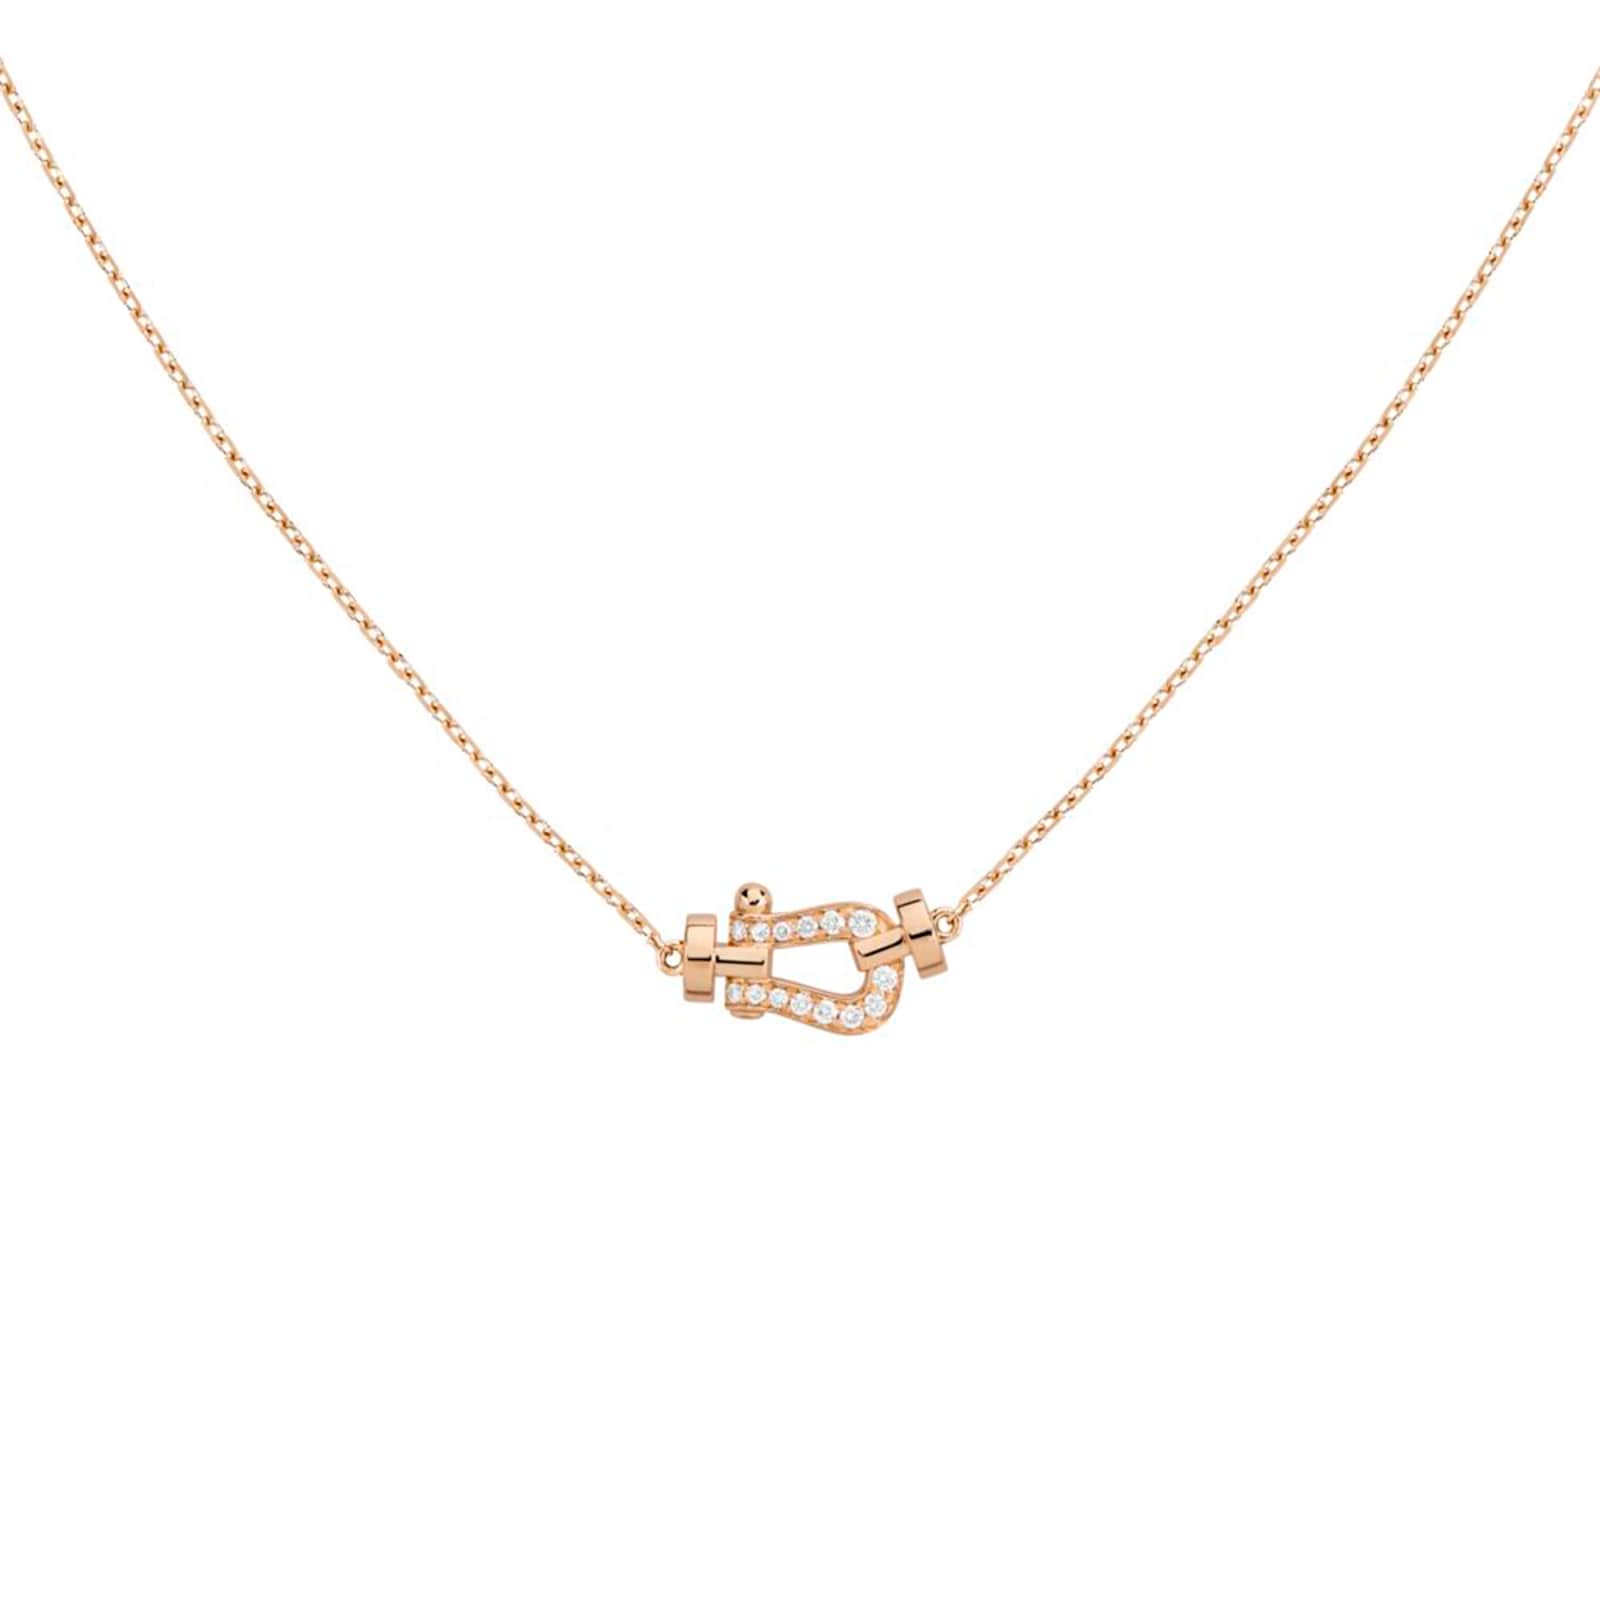 Force 10 18ct Rose Gold 0.06ct Diamond Necklace